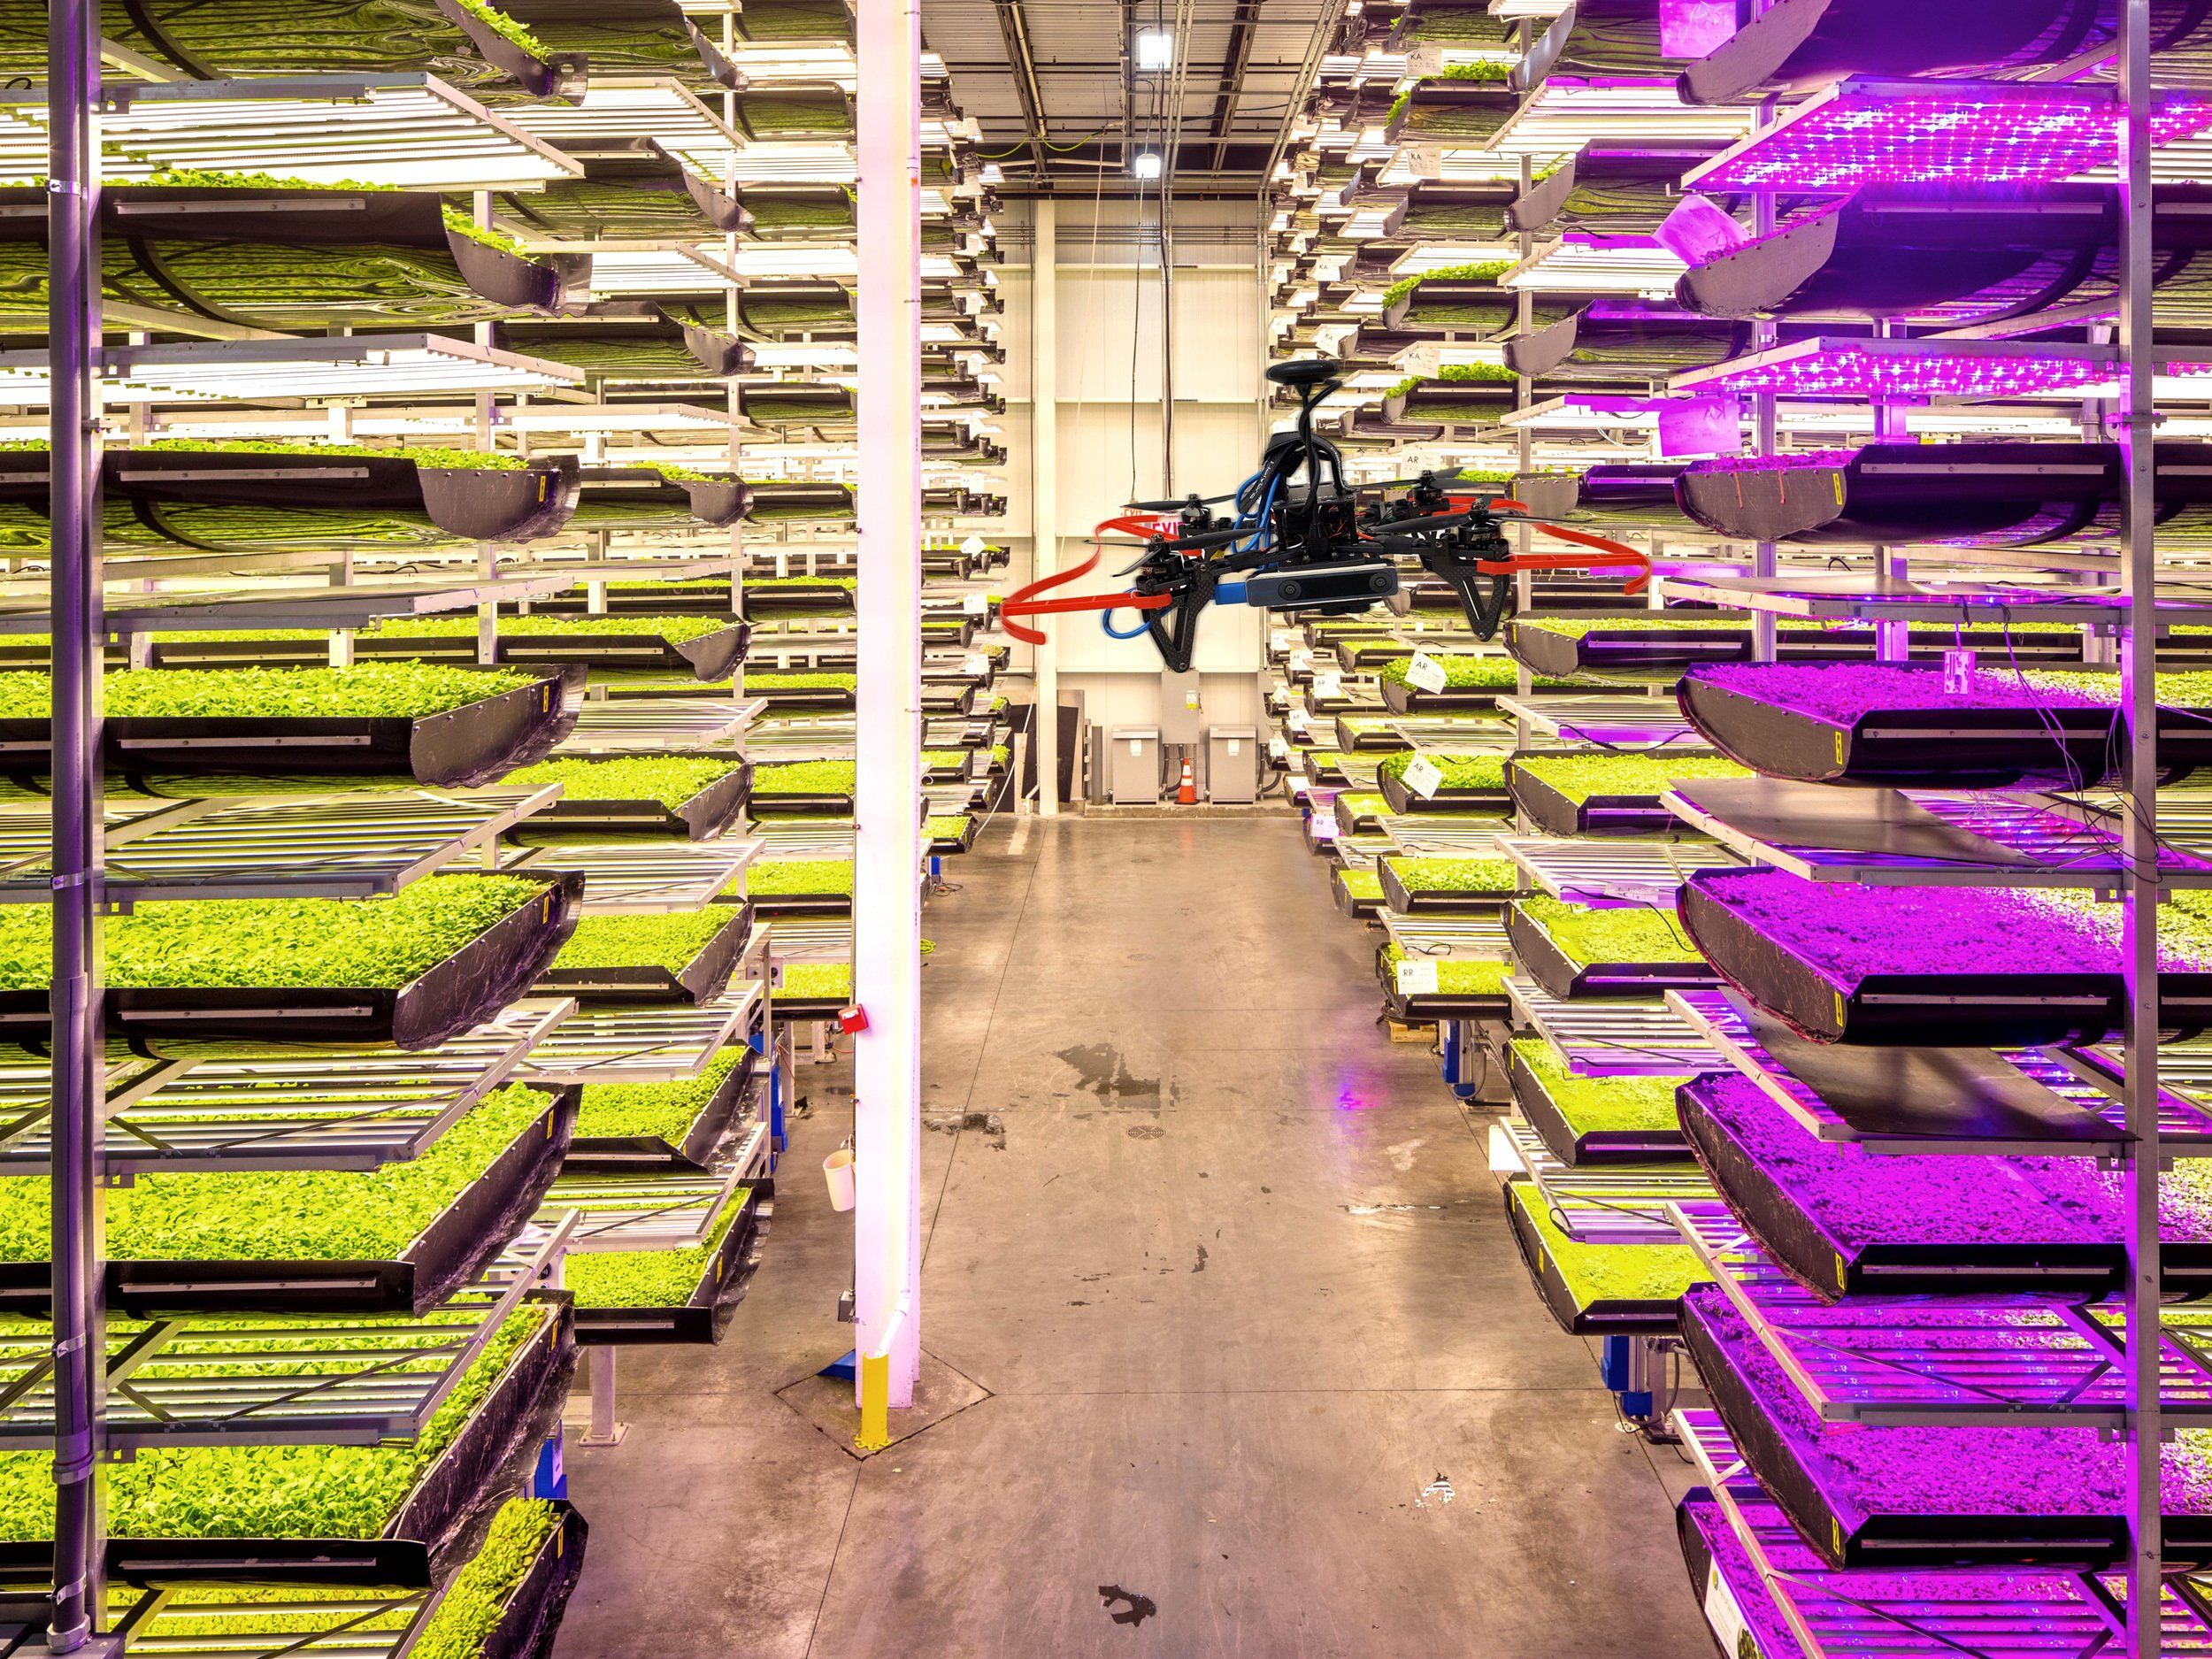 trays of greenery sitting in rows from top of the floor to the ceiling with a drone in the middle of a corridor